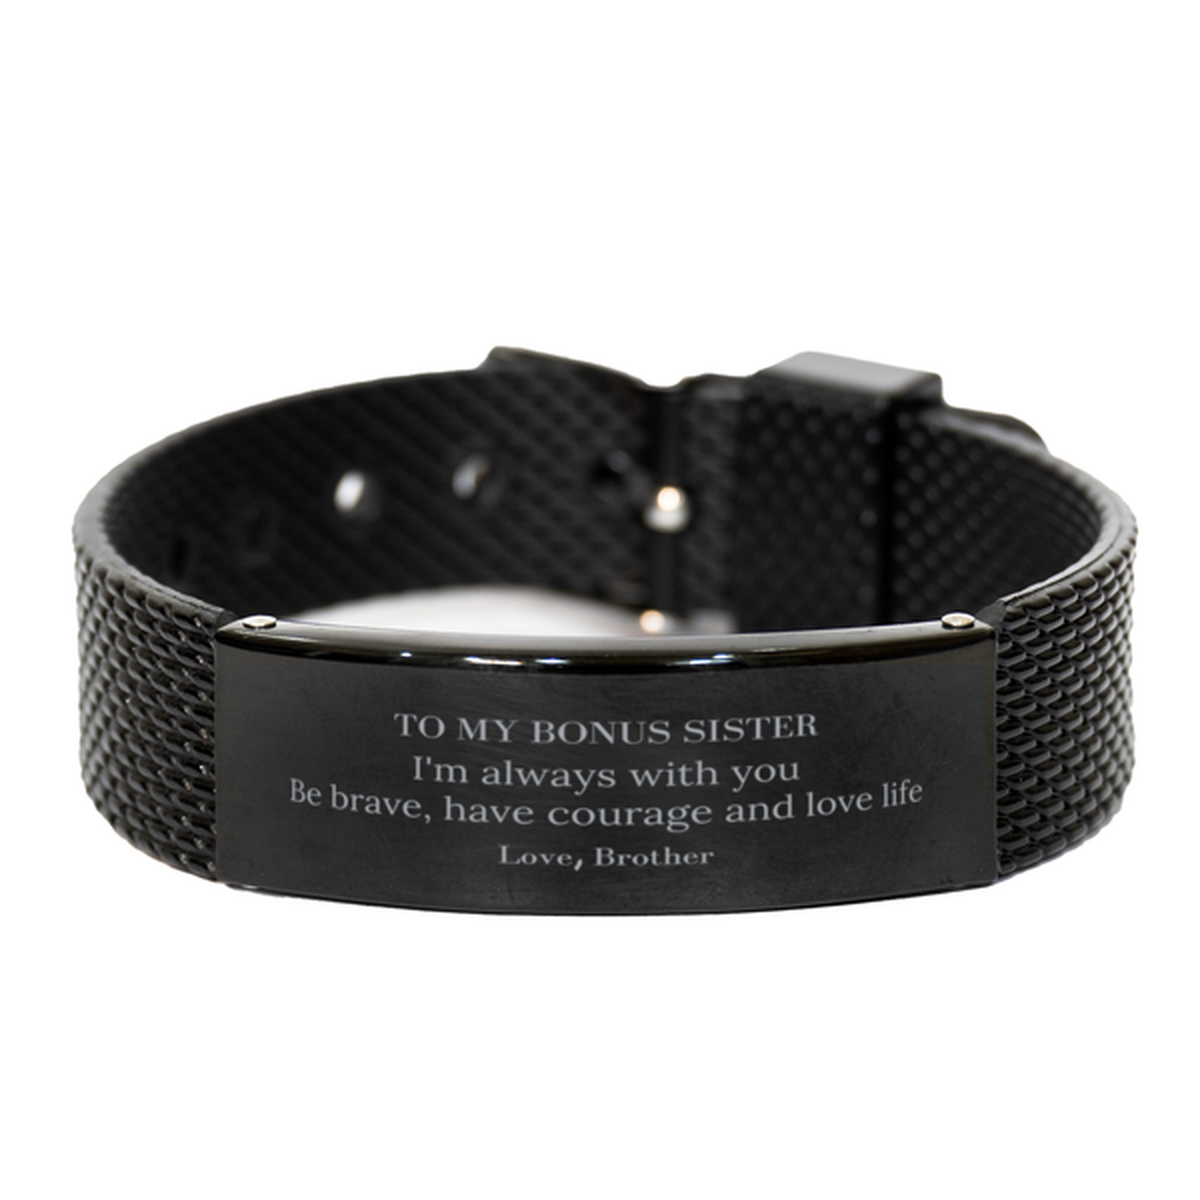 To My Bonus Sister Gifts from Brother, Unique Black Shark Mesh Bracelet Inspirational Christmas Birthday Graduation Gifts for Bonus Sister I'm always with you. Be brave, have courage and love life. Love, Brother